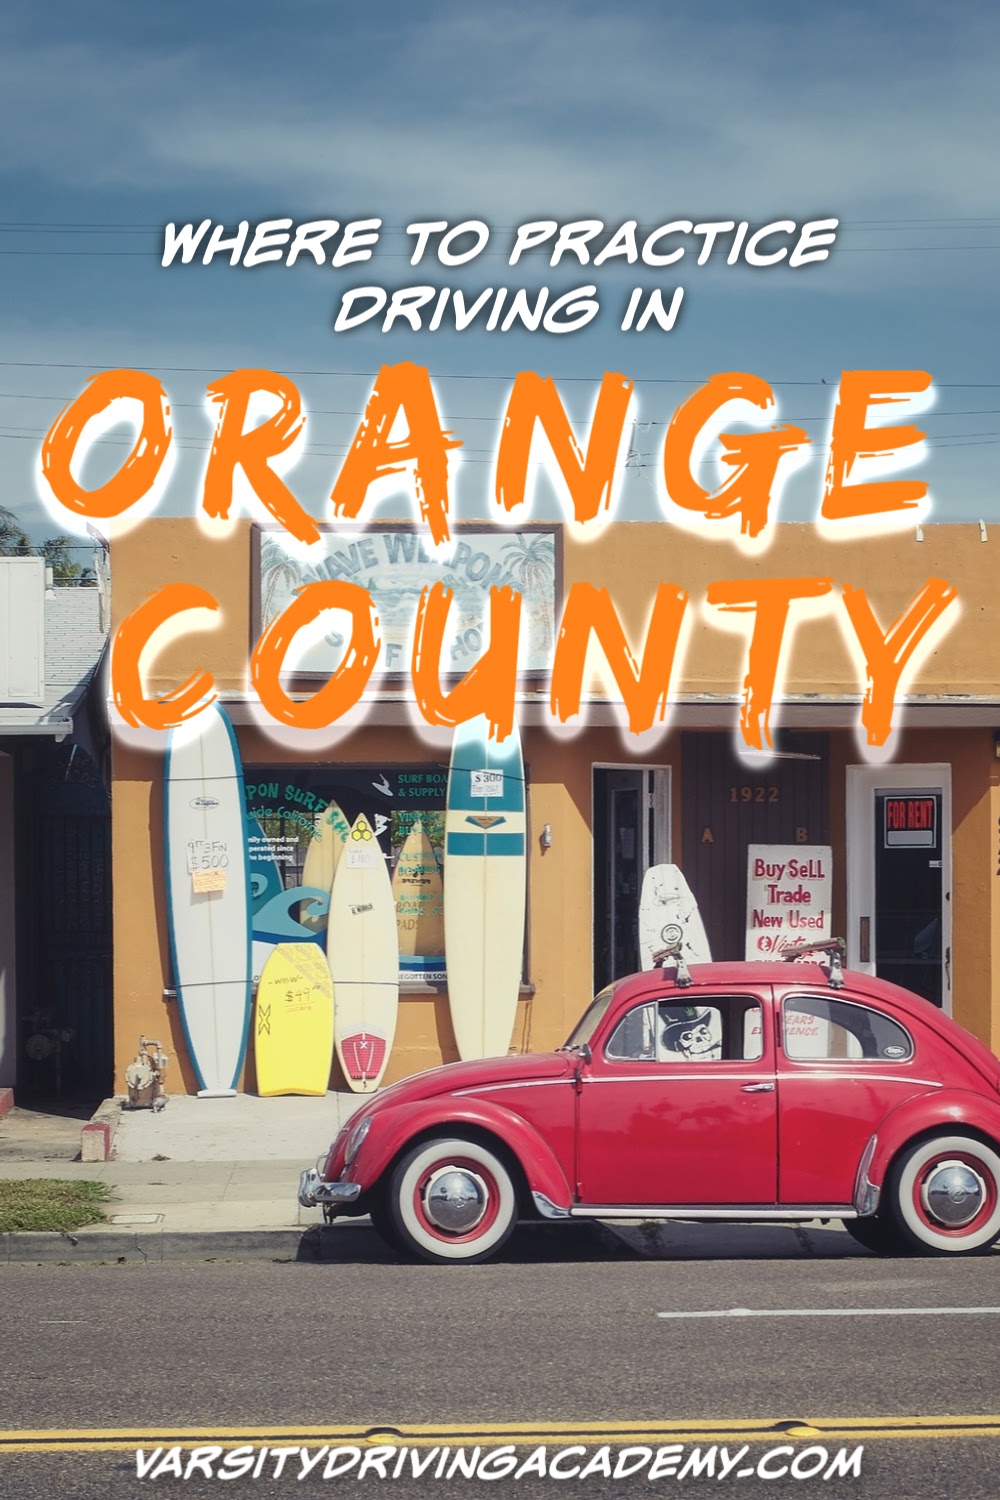 You can find where to practice driving in Orange County to make it easier and safer to make mistakes and learn from them without causing damage.